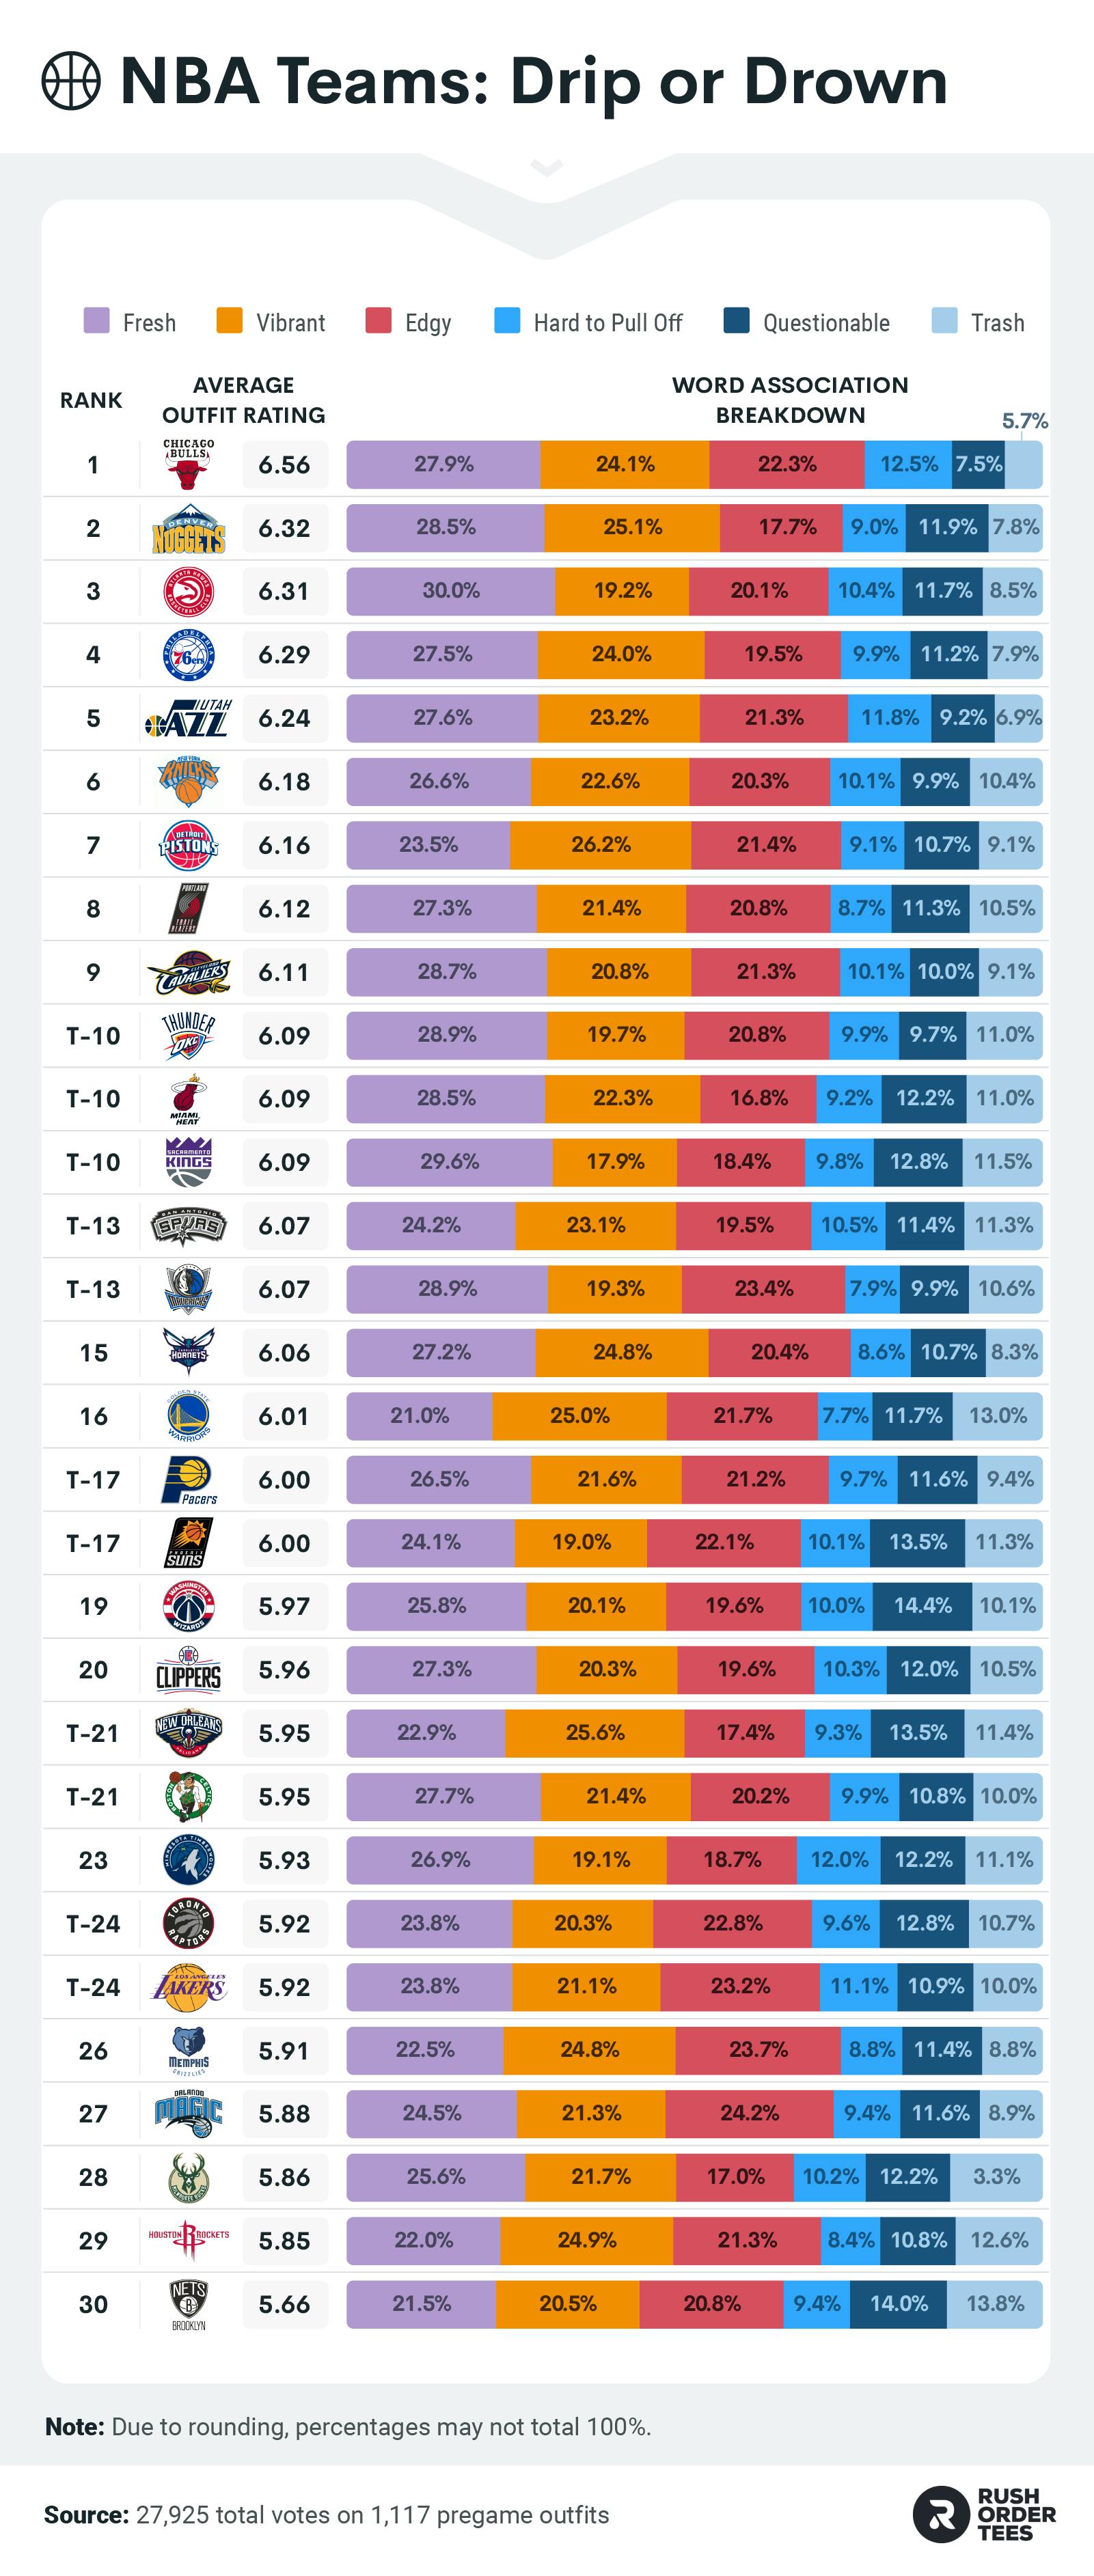 Overall ranking of best dressed NBA teams and word association breakdown